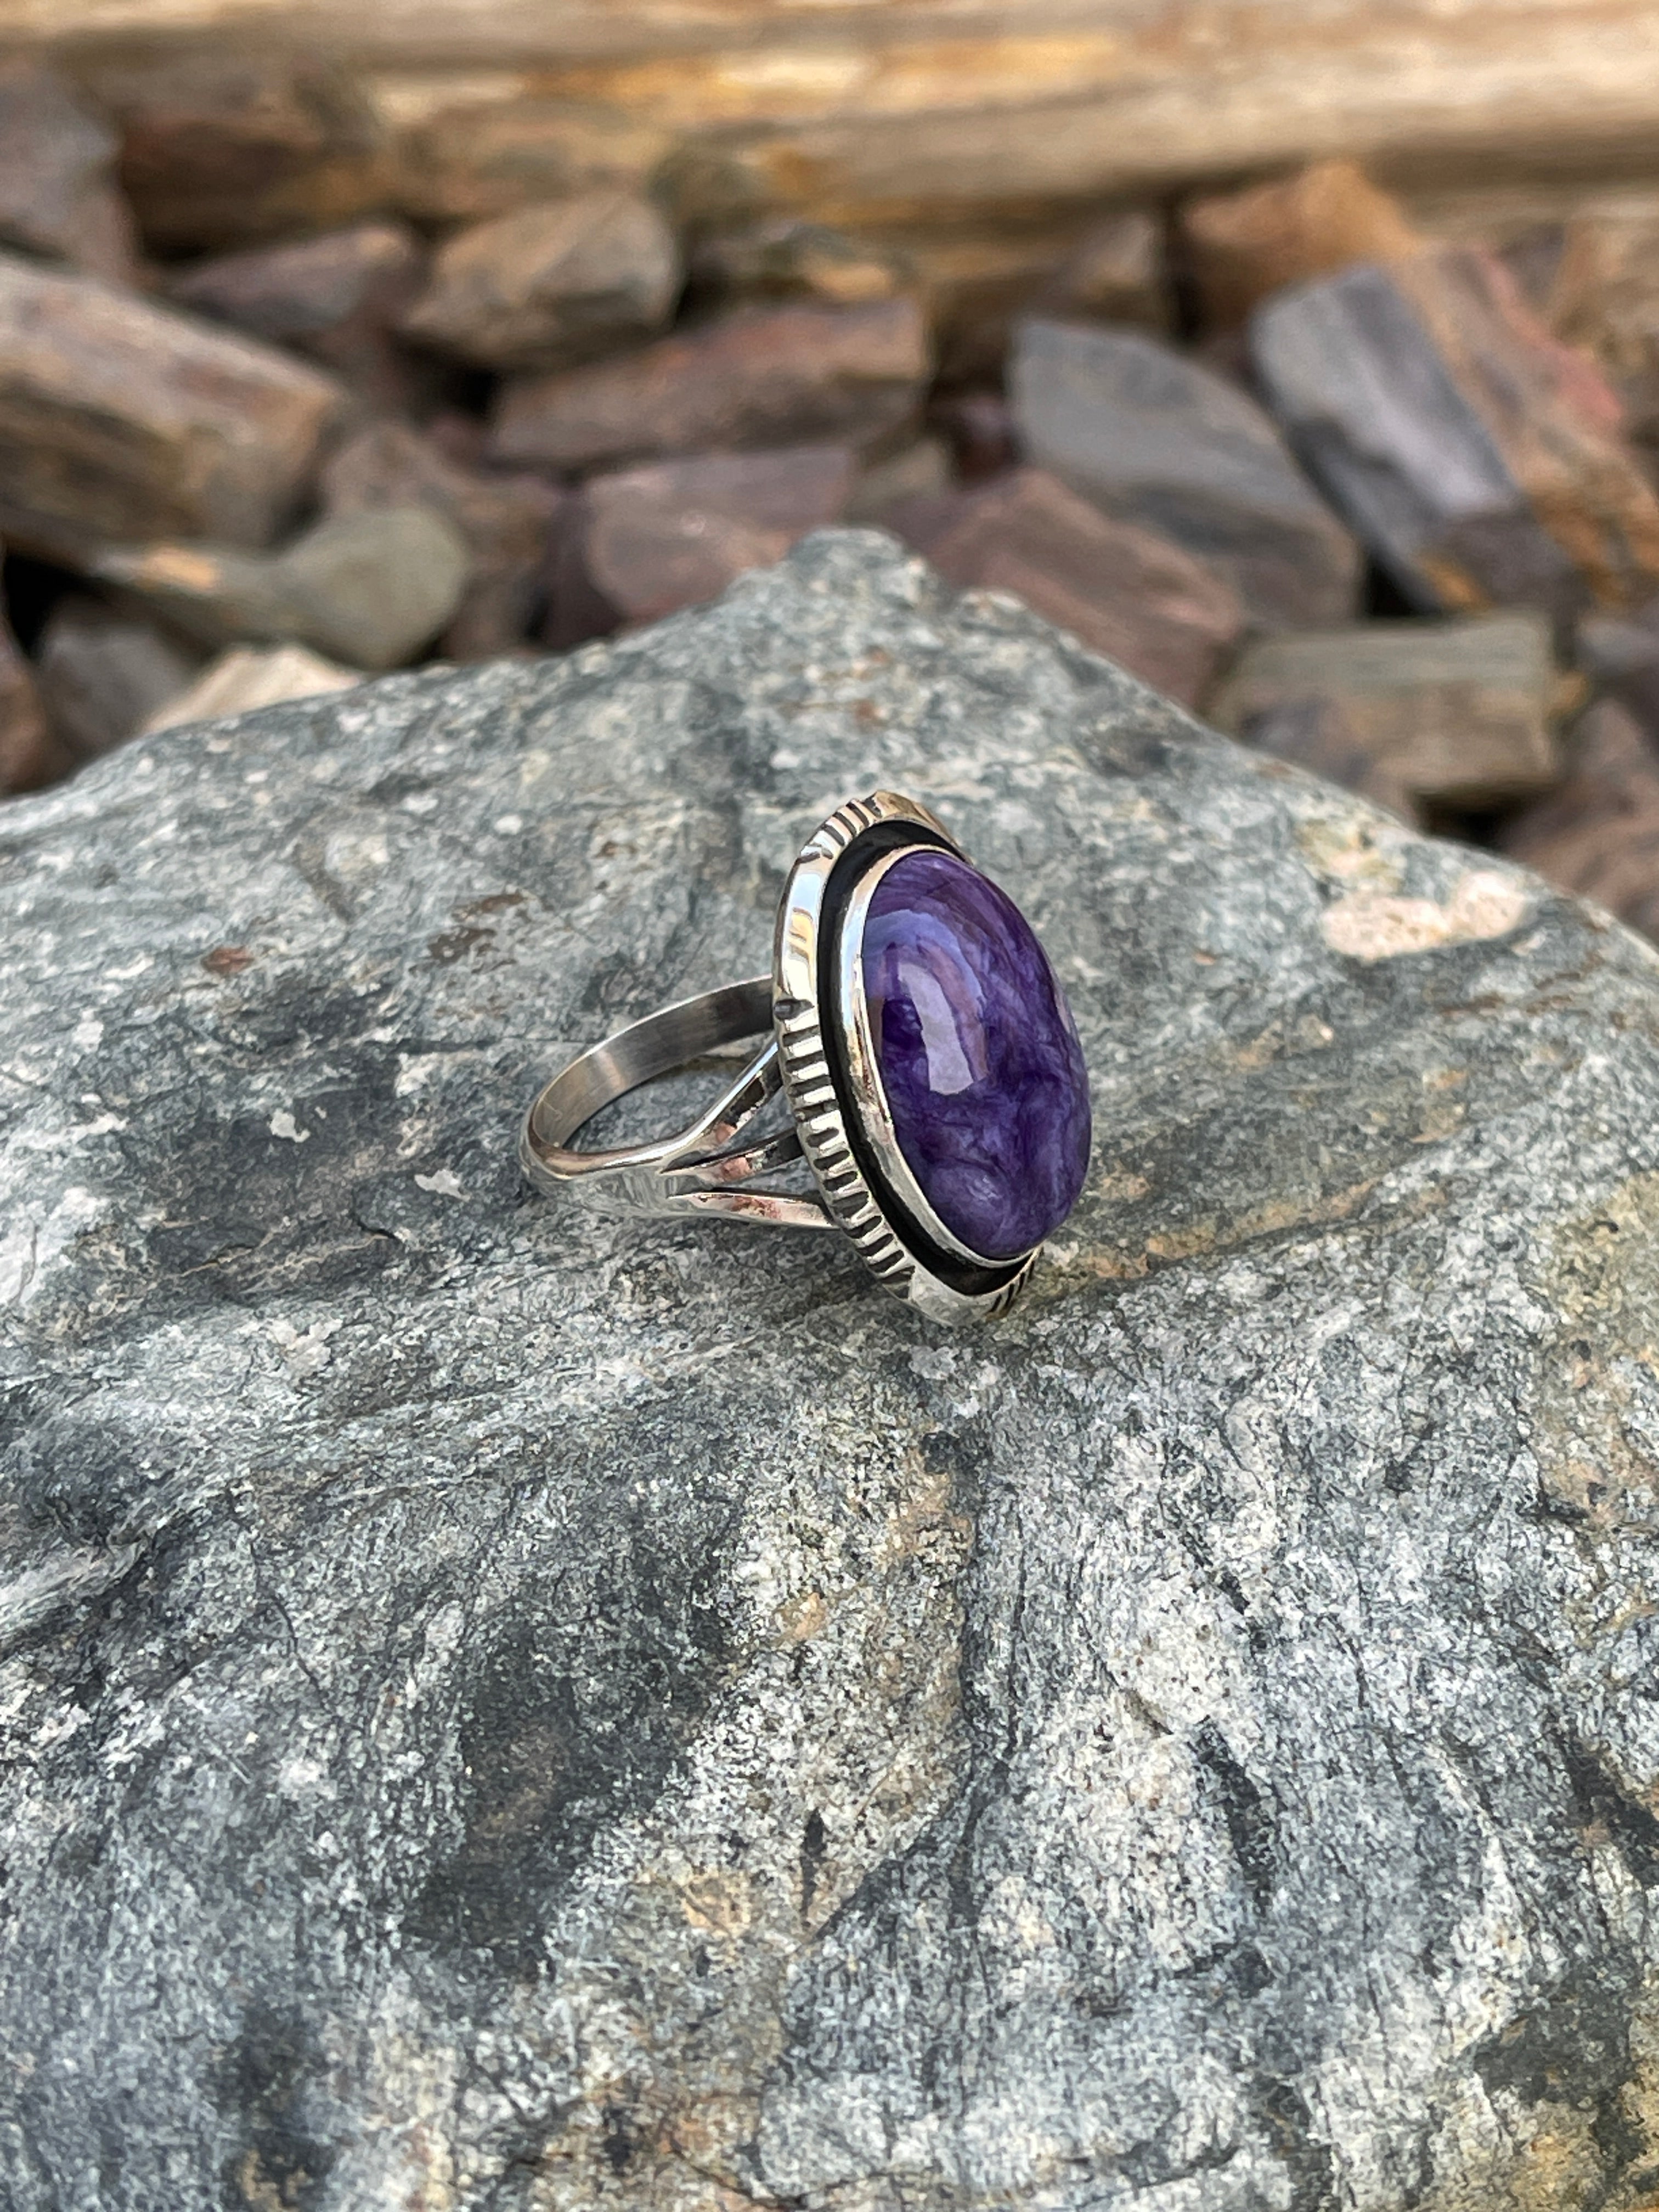 Handmade Solid Sterling Silver Purple Charoite Ring with Shadow Box Trim - 9